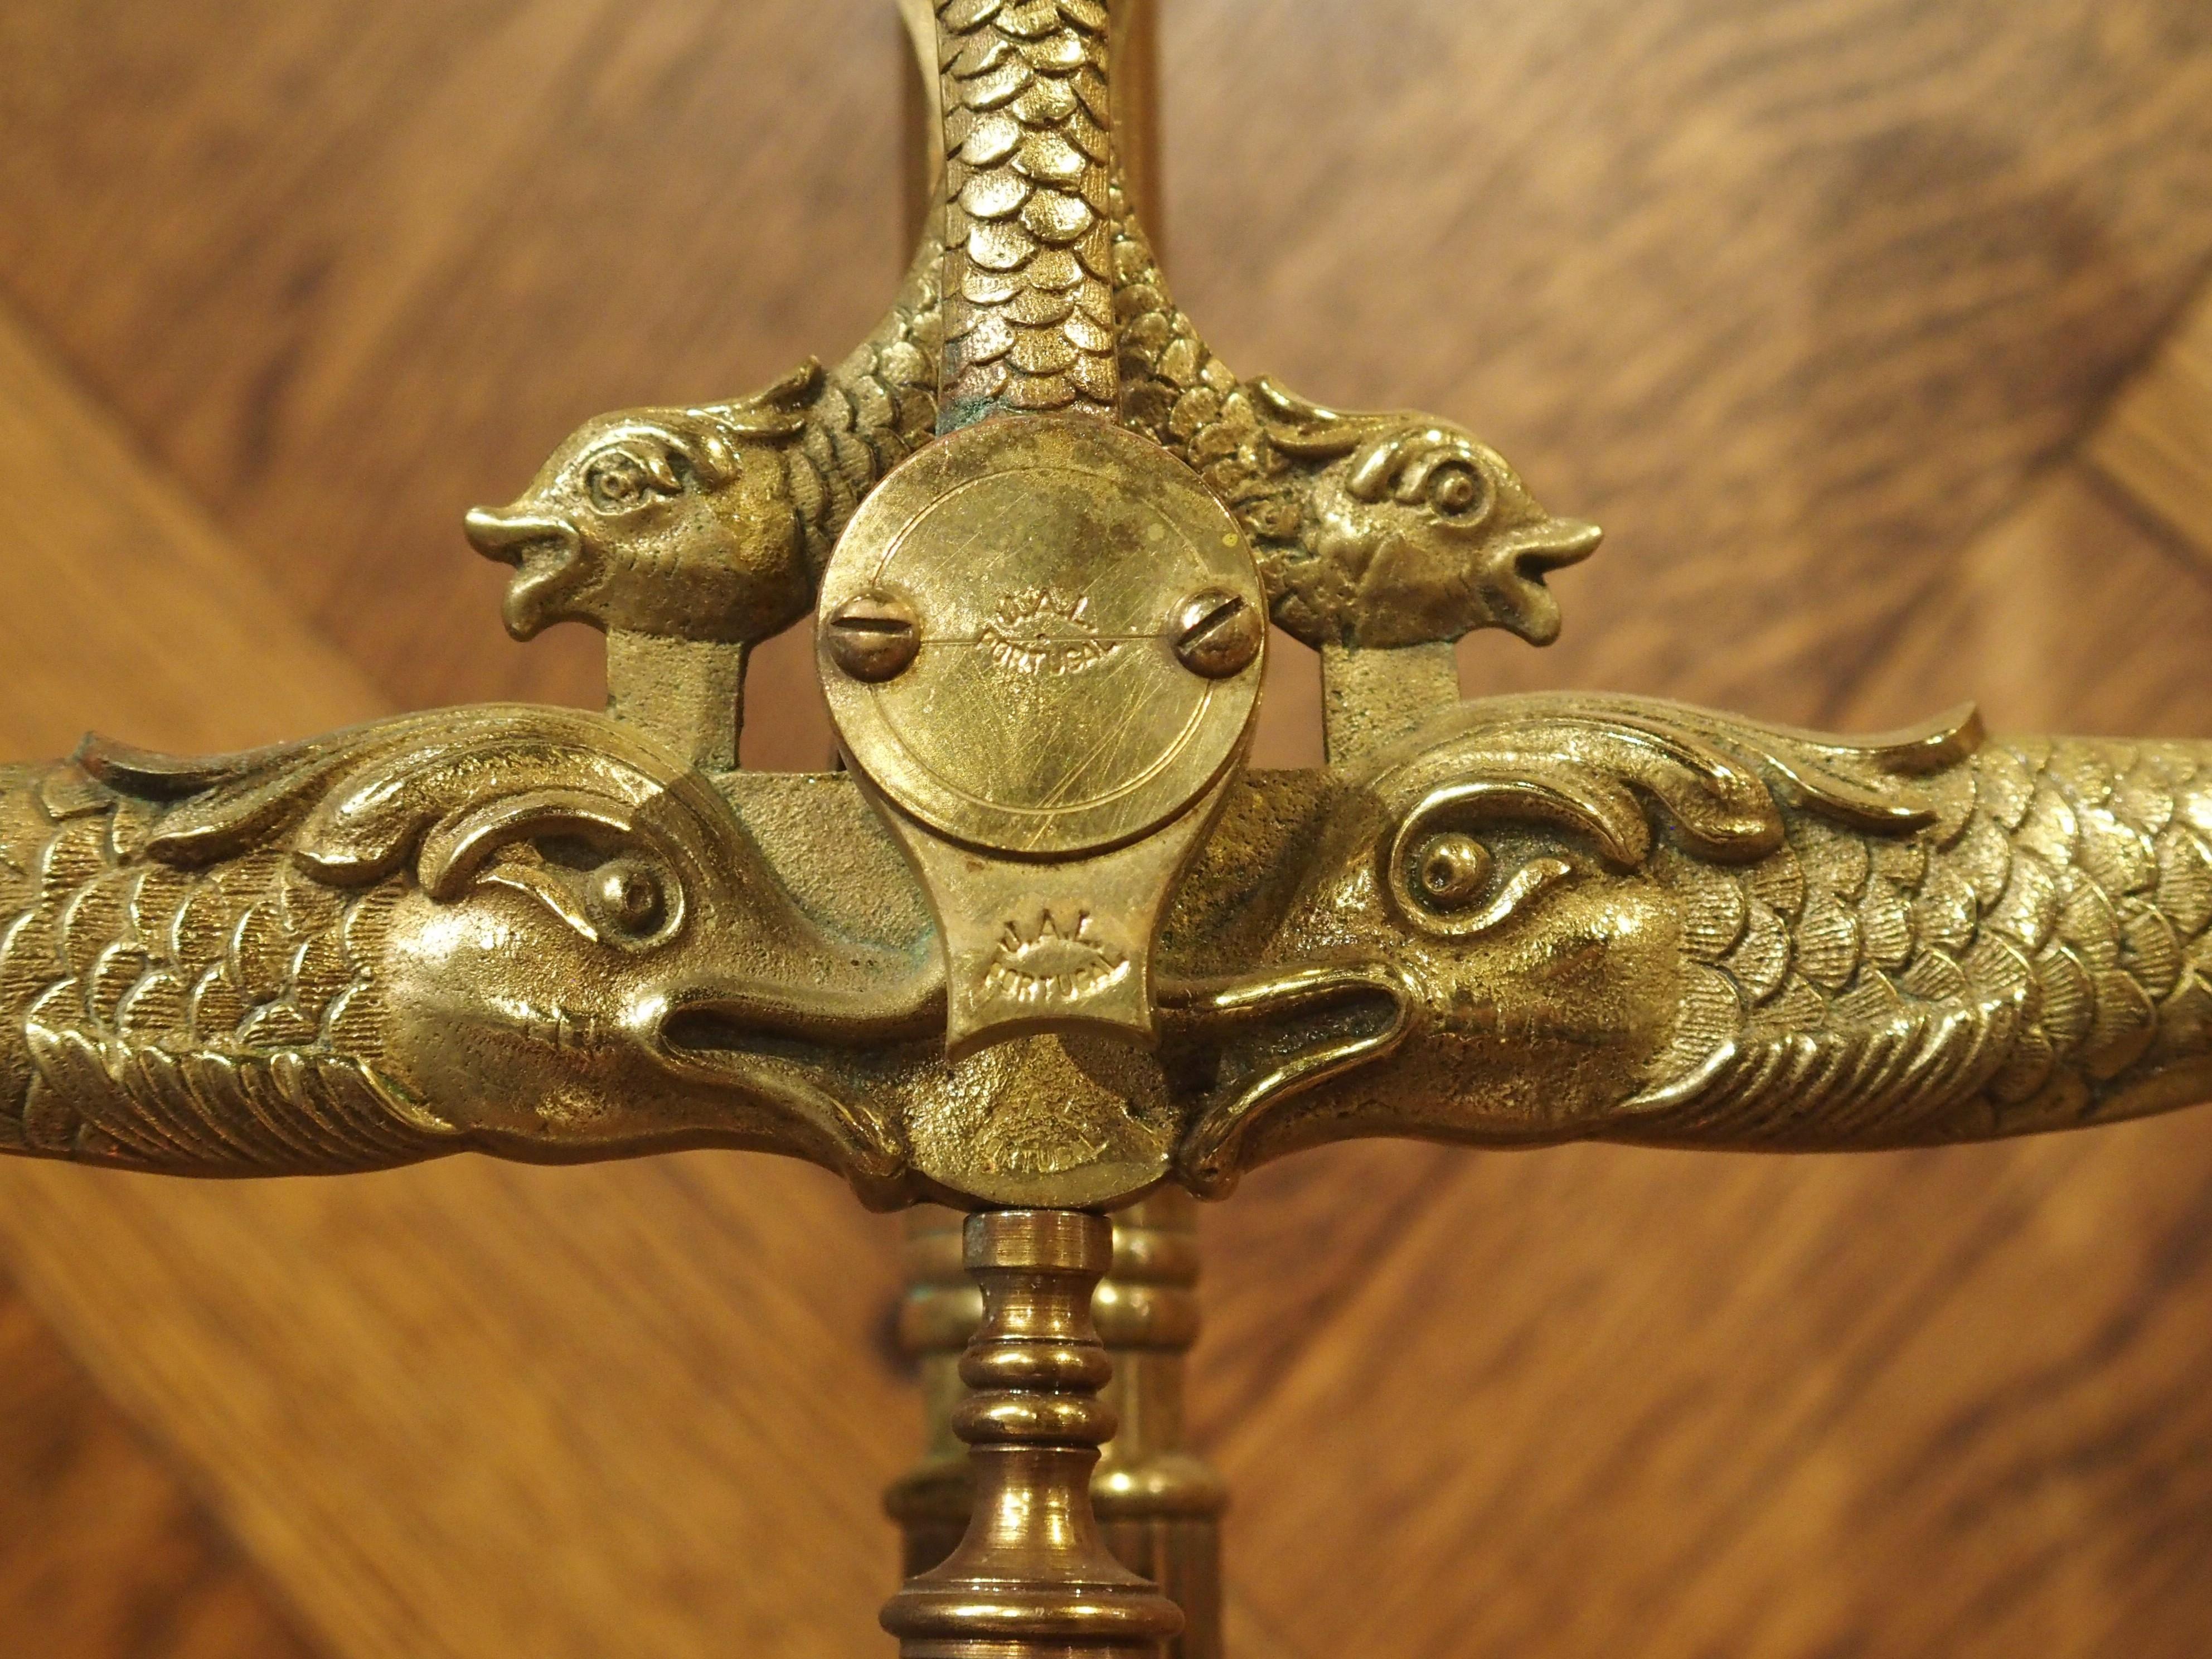 Embellished with stylized dolphins and serpents, this gilt bronze and brass apothecary scale was made in Portugal in the early 1900s.

This style of scale is called a “pivot balance” because the beam, which is the horizontal lever, is pivoted to